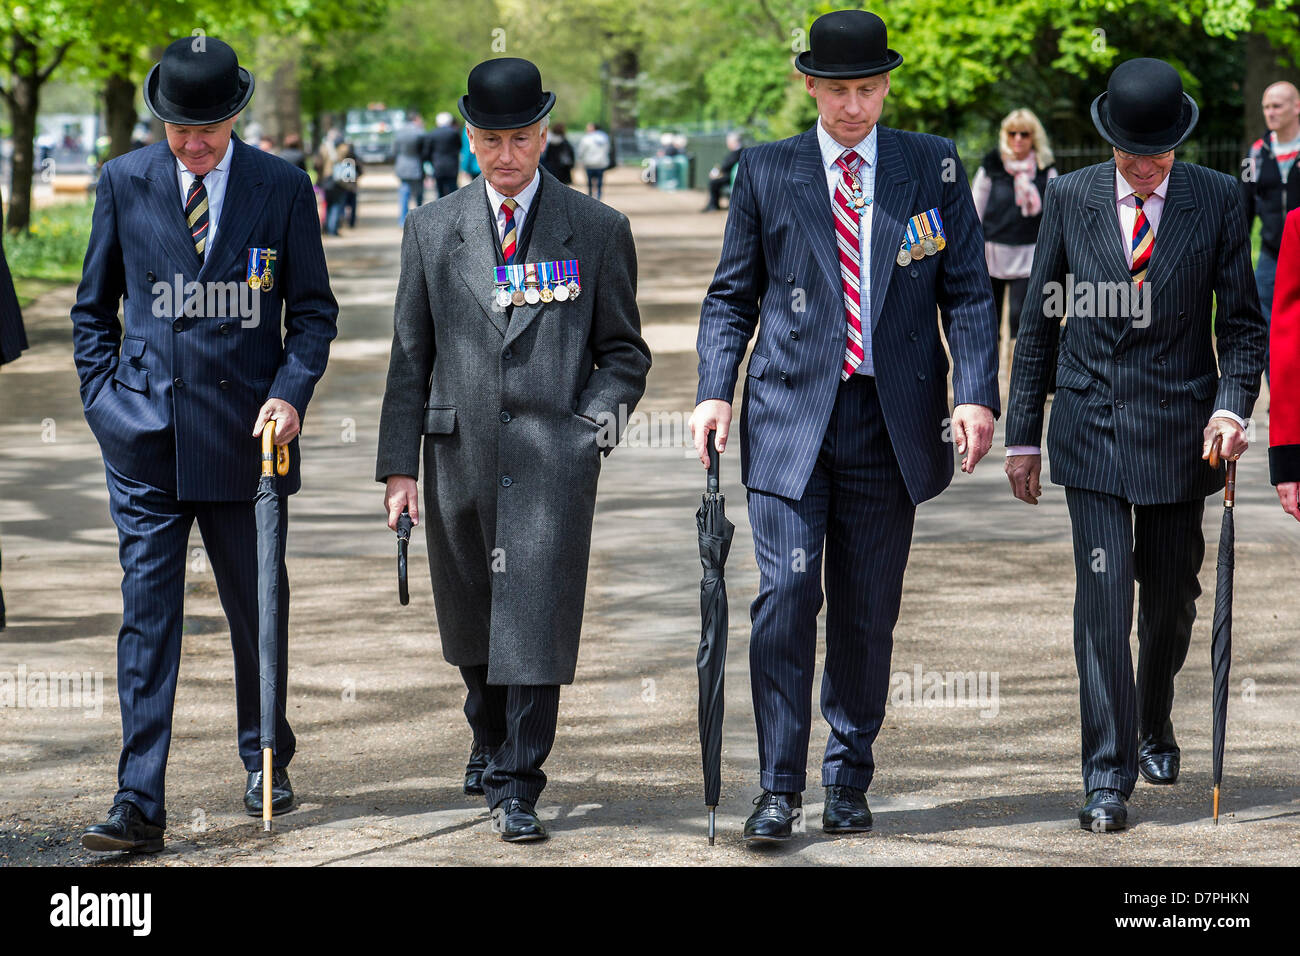 Hyde Park, London, UK 12 may 2013. Her Royal Highness The Princess Royal KG, KT, GCVO, Colonel in Chief The King’s Royal Hussars takes the salute and lays a wreath at the Annual Parade and Service of The Combined Cavalry Old Comrades Association at the Cavalry Memorial. Officers wear bowler hats and suits are worn instead of uniform by all but the bands.  5 bands led marching detachments of the Cavalry and Yeomanry Regimental Associations and Veterans ranging from World War 2 to Iraq and Afghanistan. State Trumpeters of the Household Cavalry and a Piper from F Company The Scots Guards also too Stock Photo